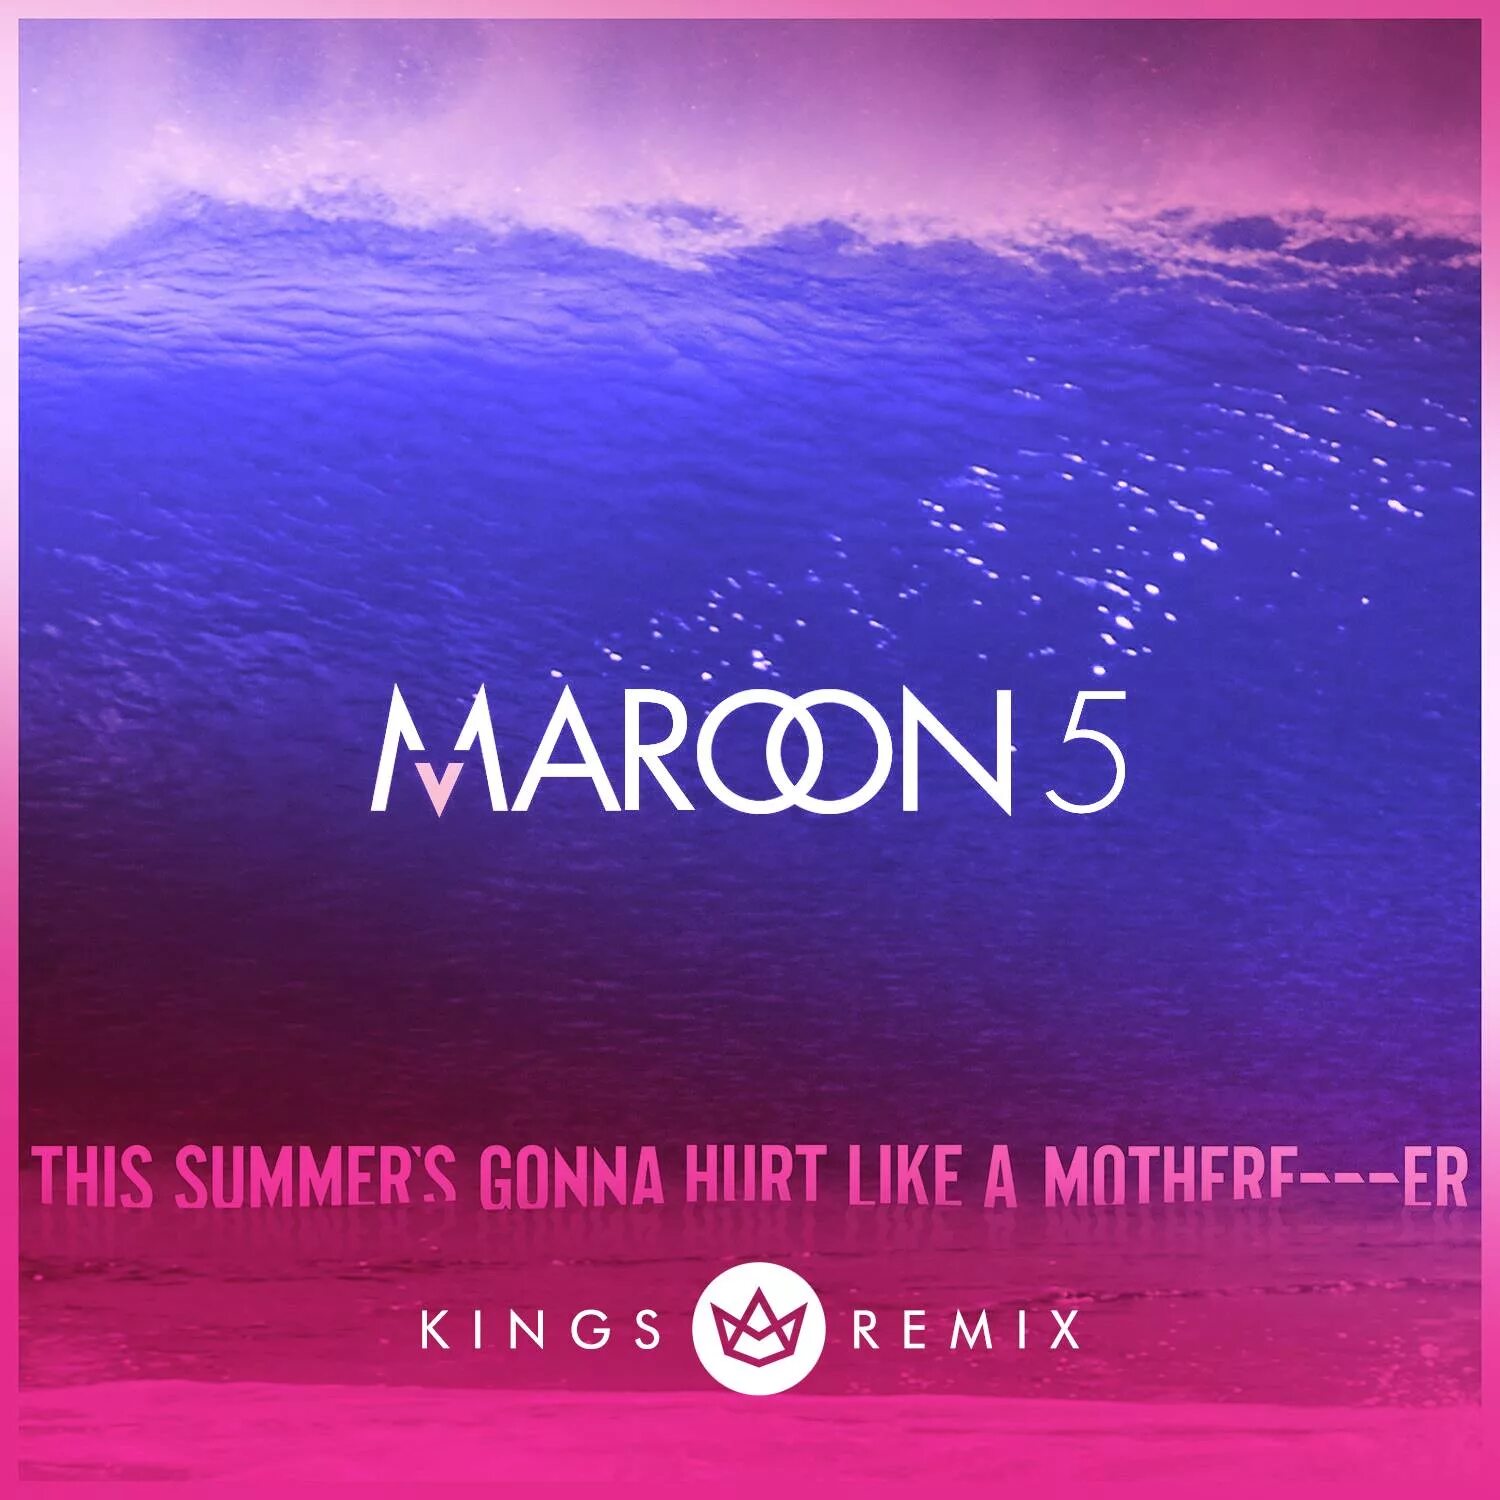 Hurt like. Maroon 5 - this Summer's gonna hurt. Marooned обложка альбома. Maroon 5 this Summer. Maroon5 - this Summer_s gonna hurt like a motherfucker.